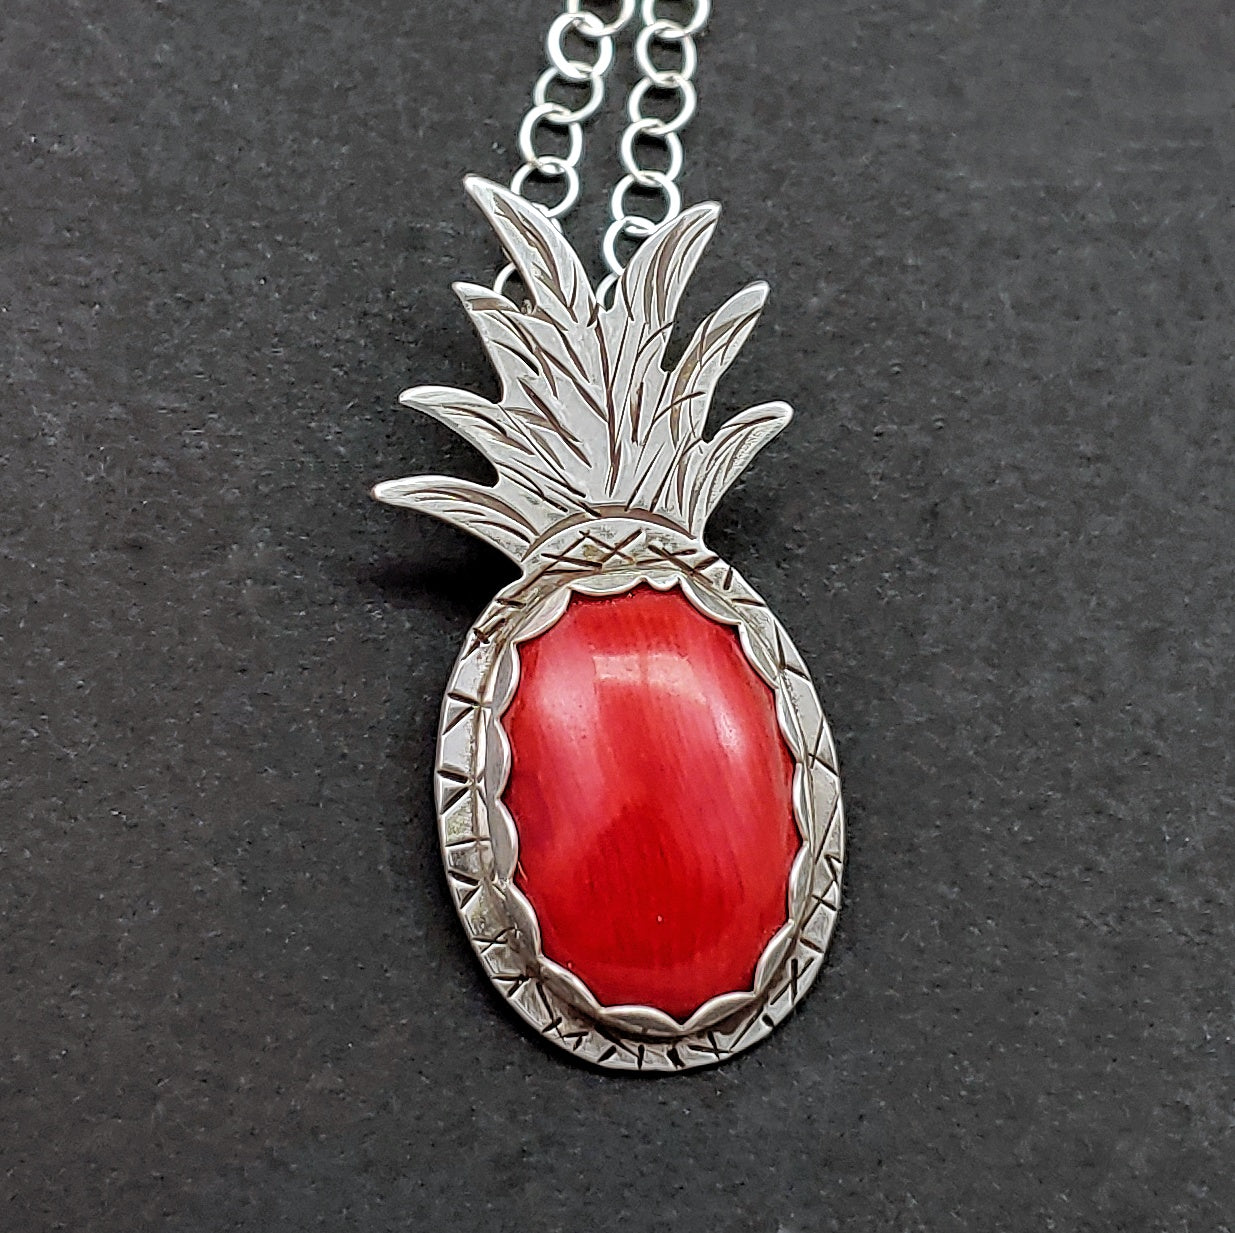 Pineapple Necklace with Red Coral